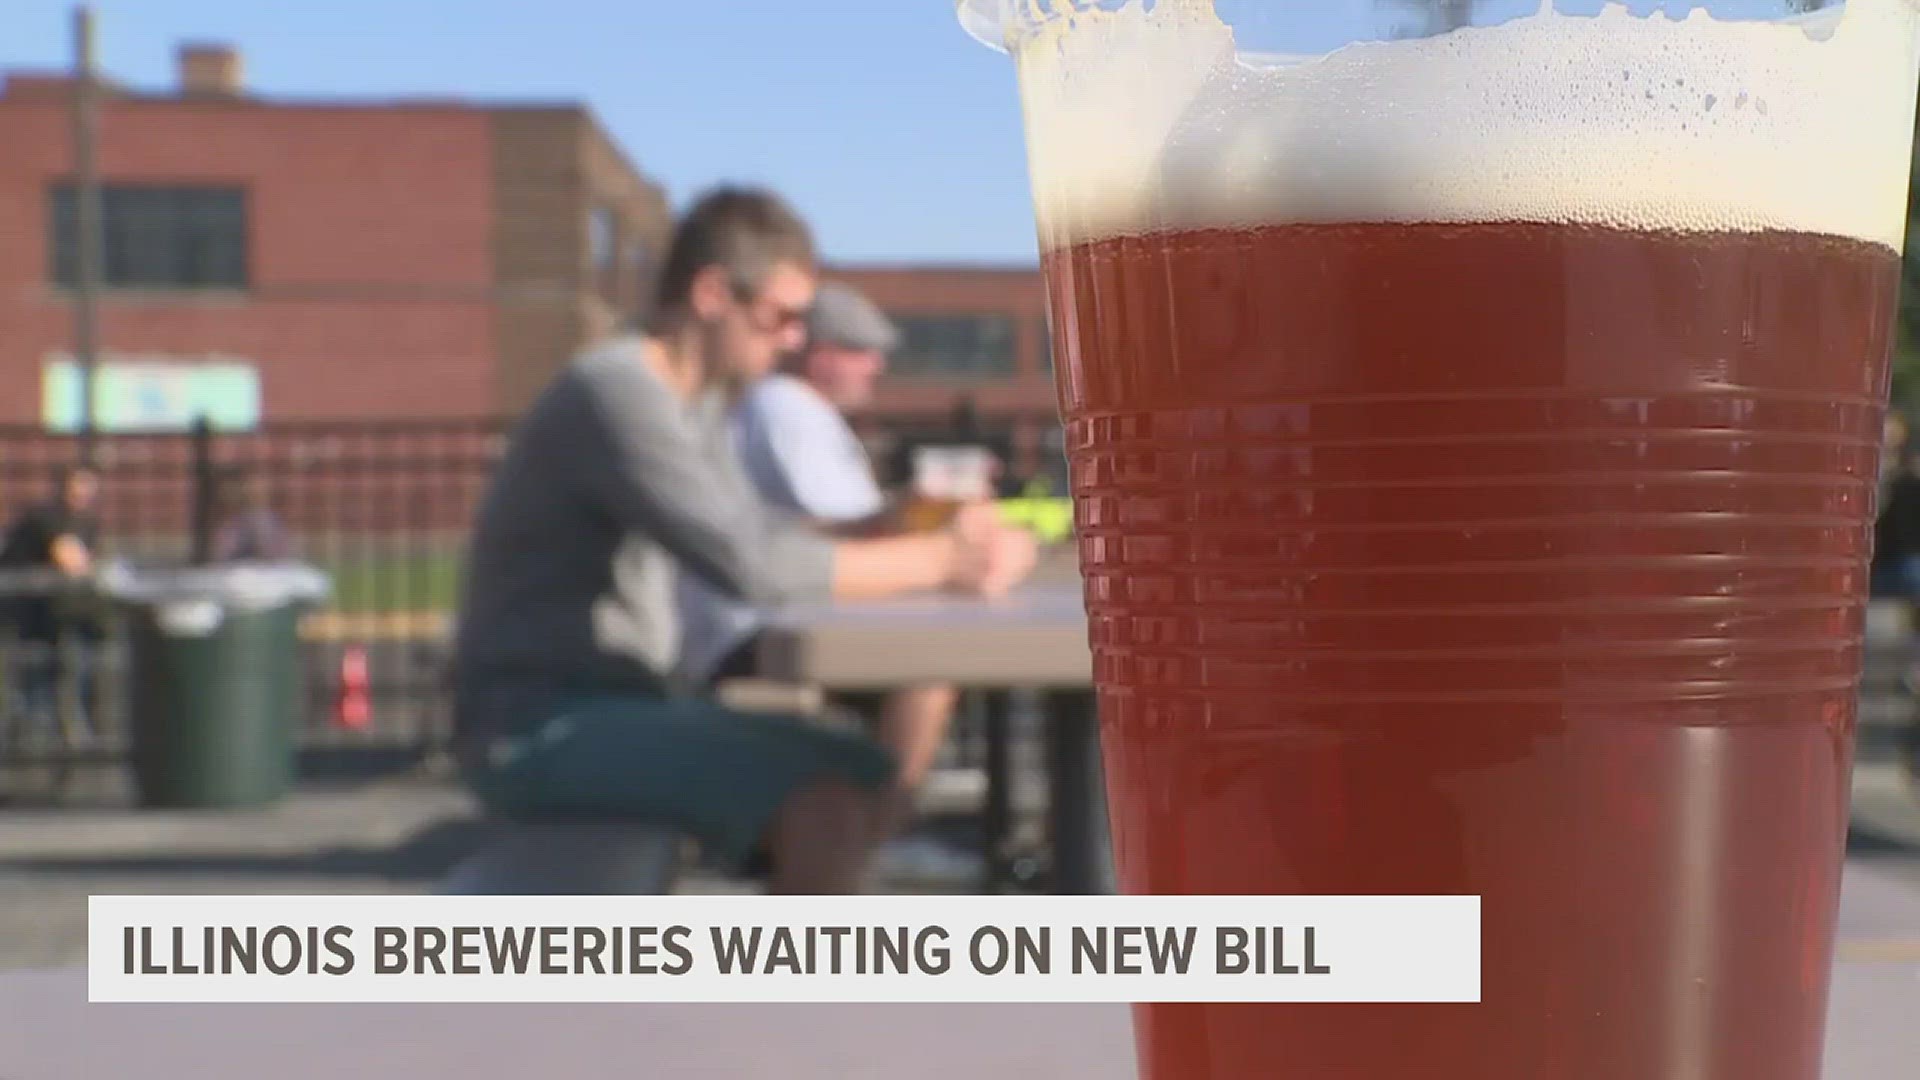 The bill allows for Illinois breweries to be able to ship its products directly to its customers